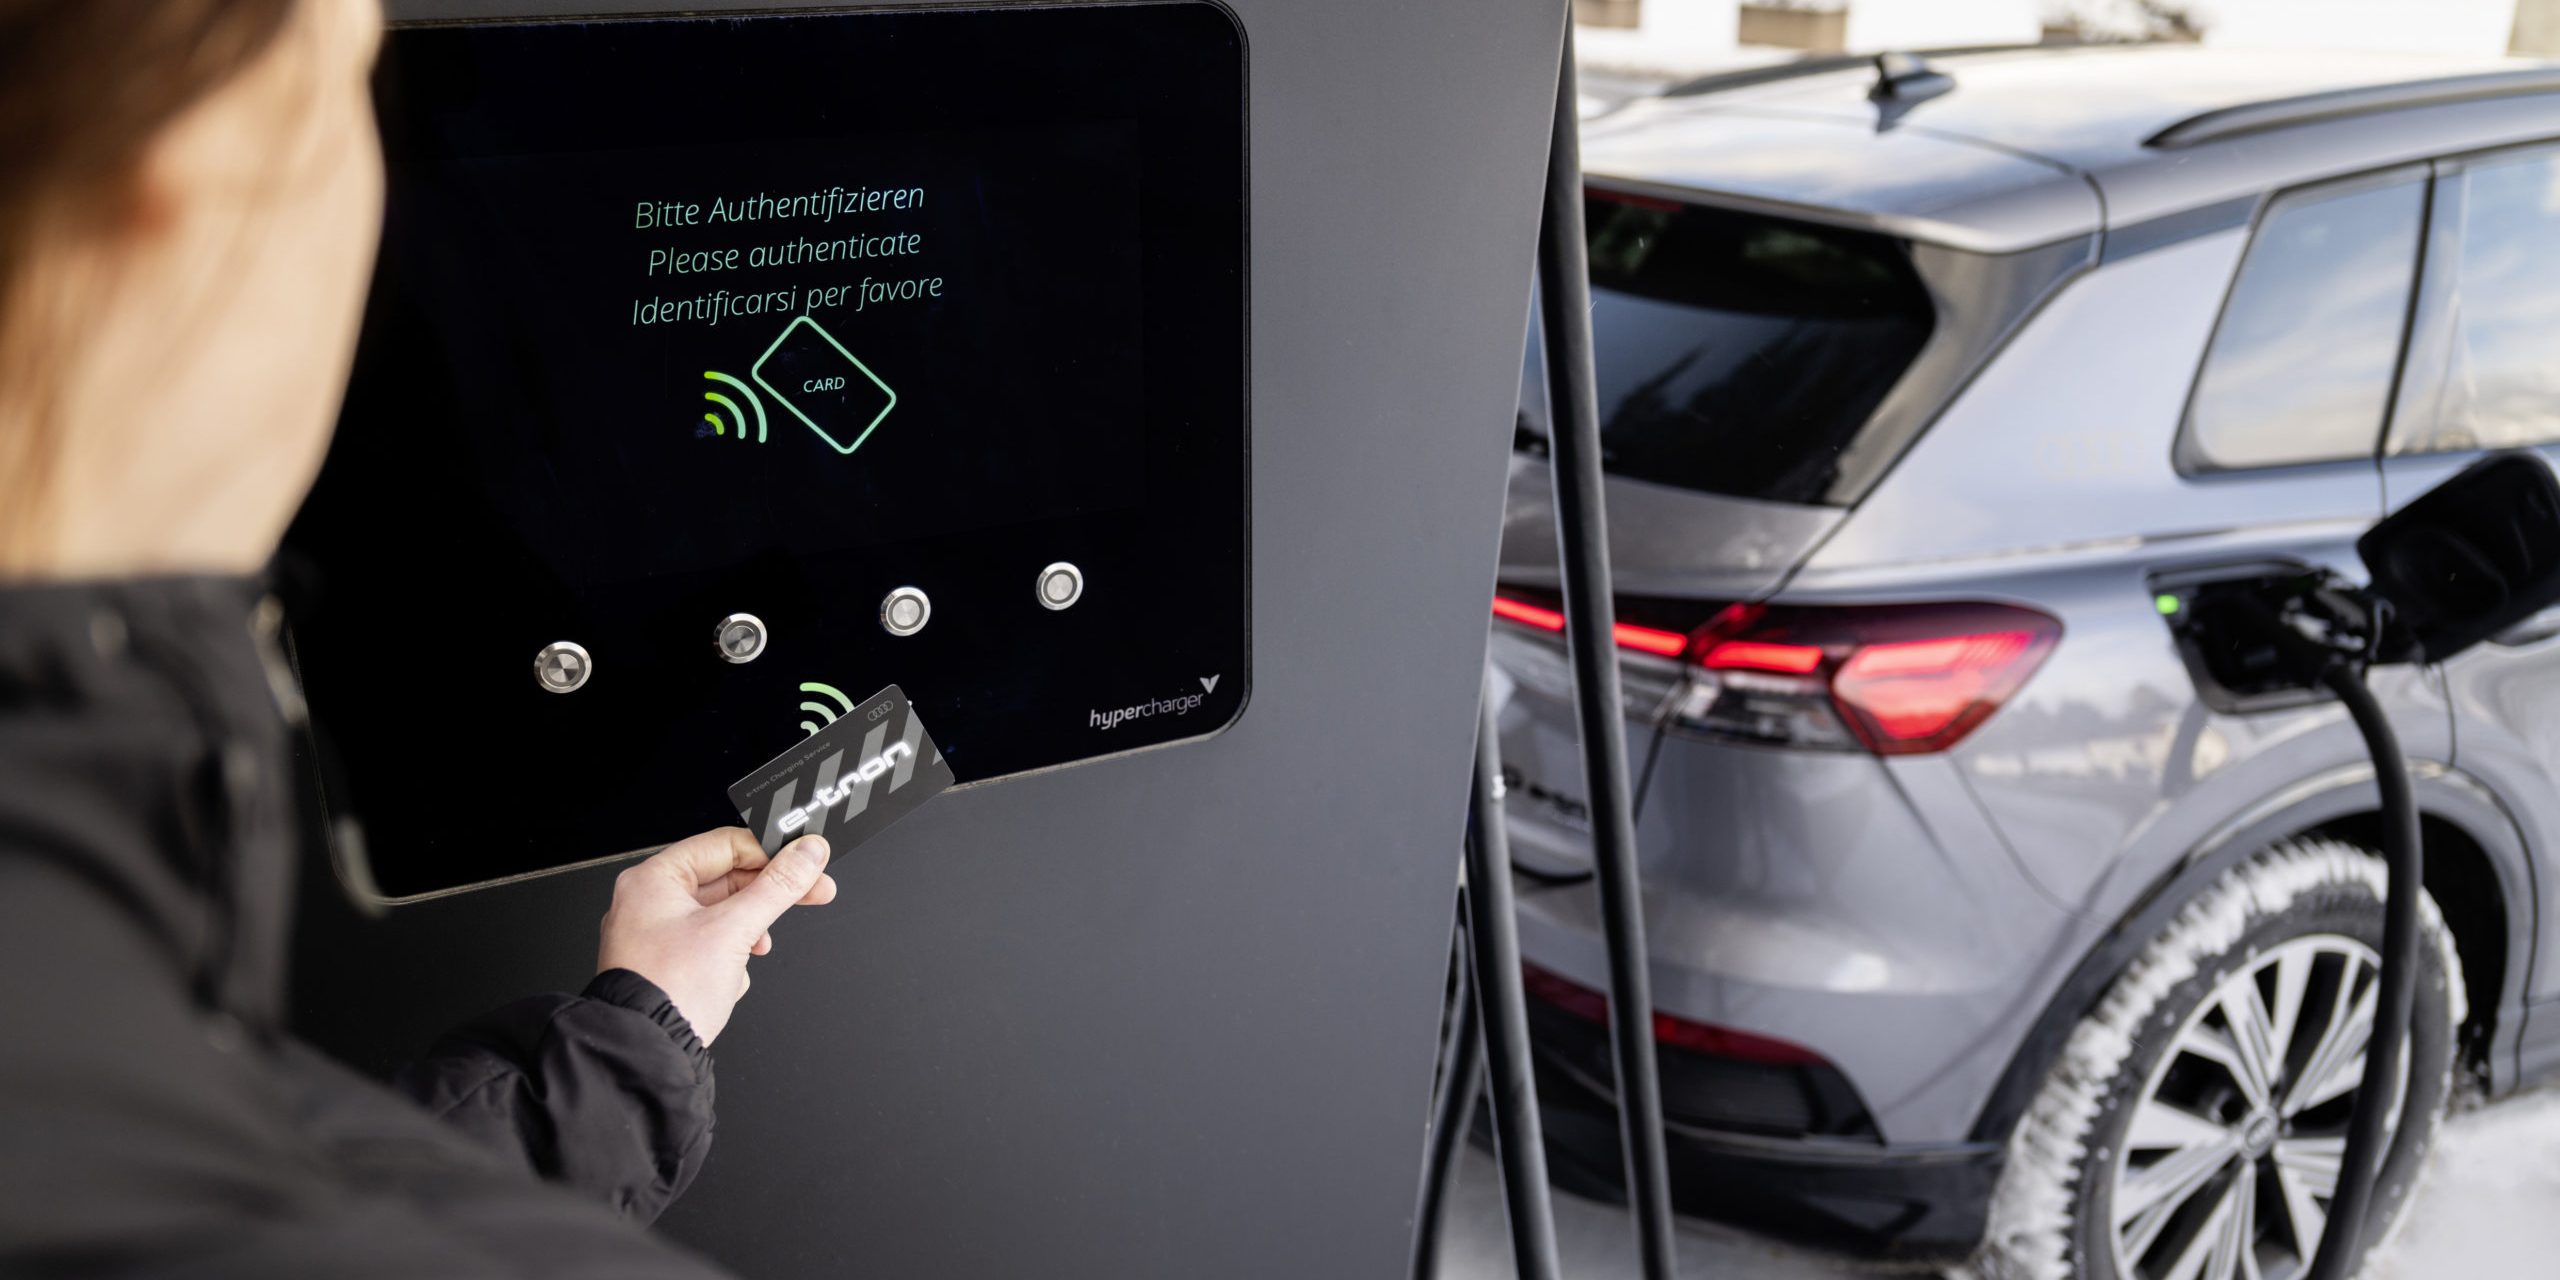 Audi is increasing investments in electromobility